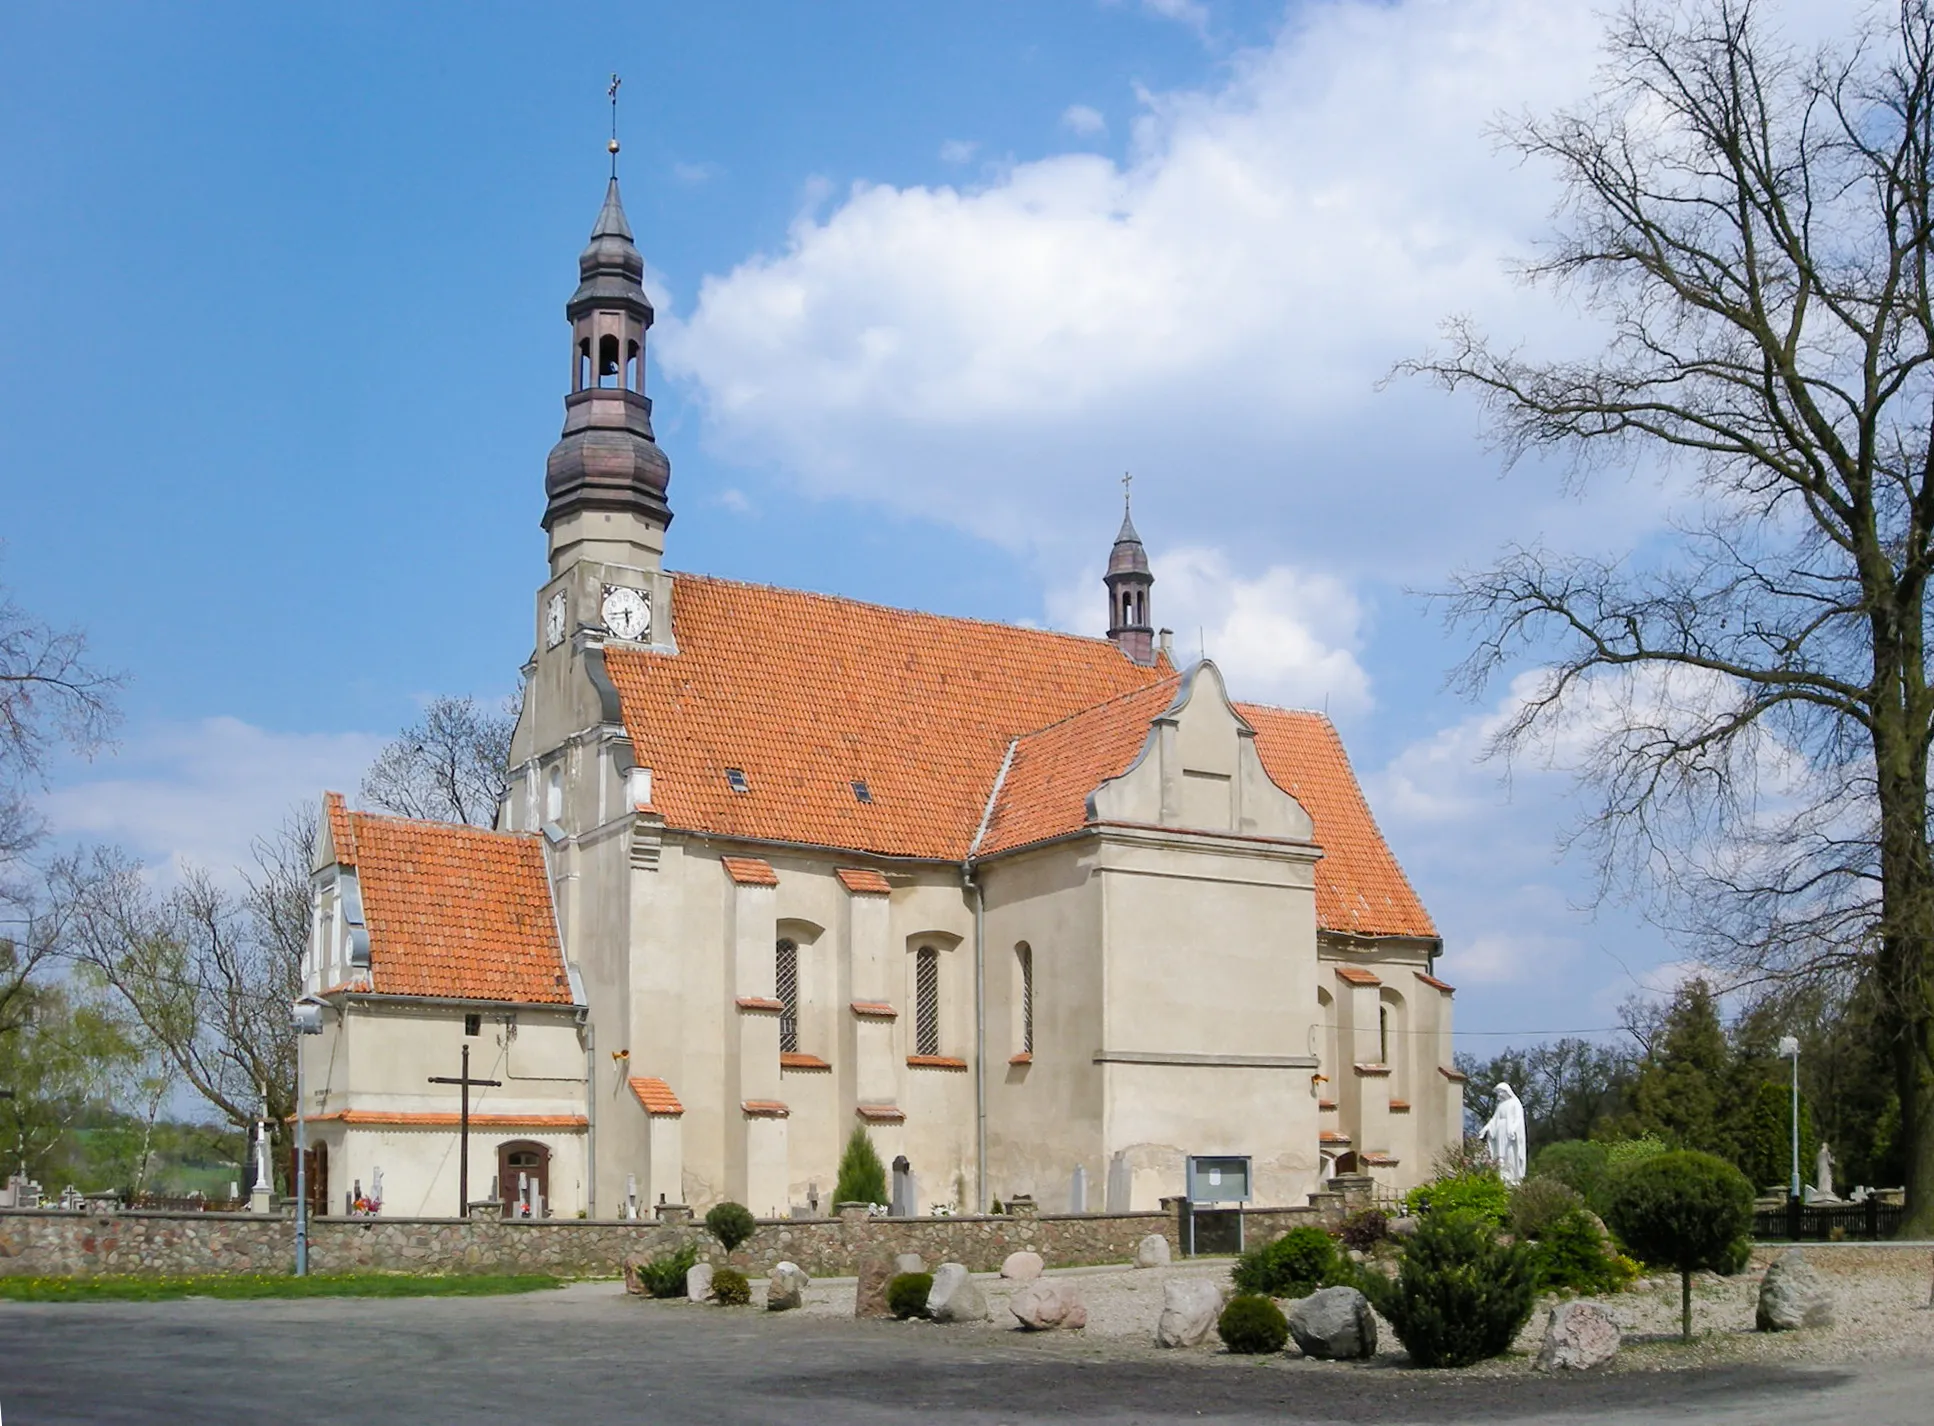 Photo showing: The church in Byszewo, Poland.